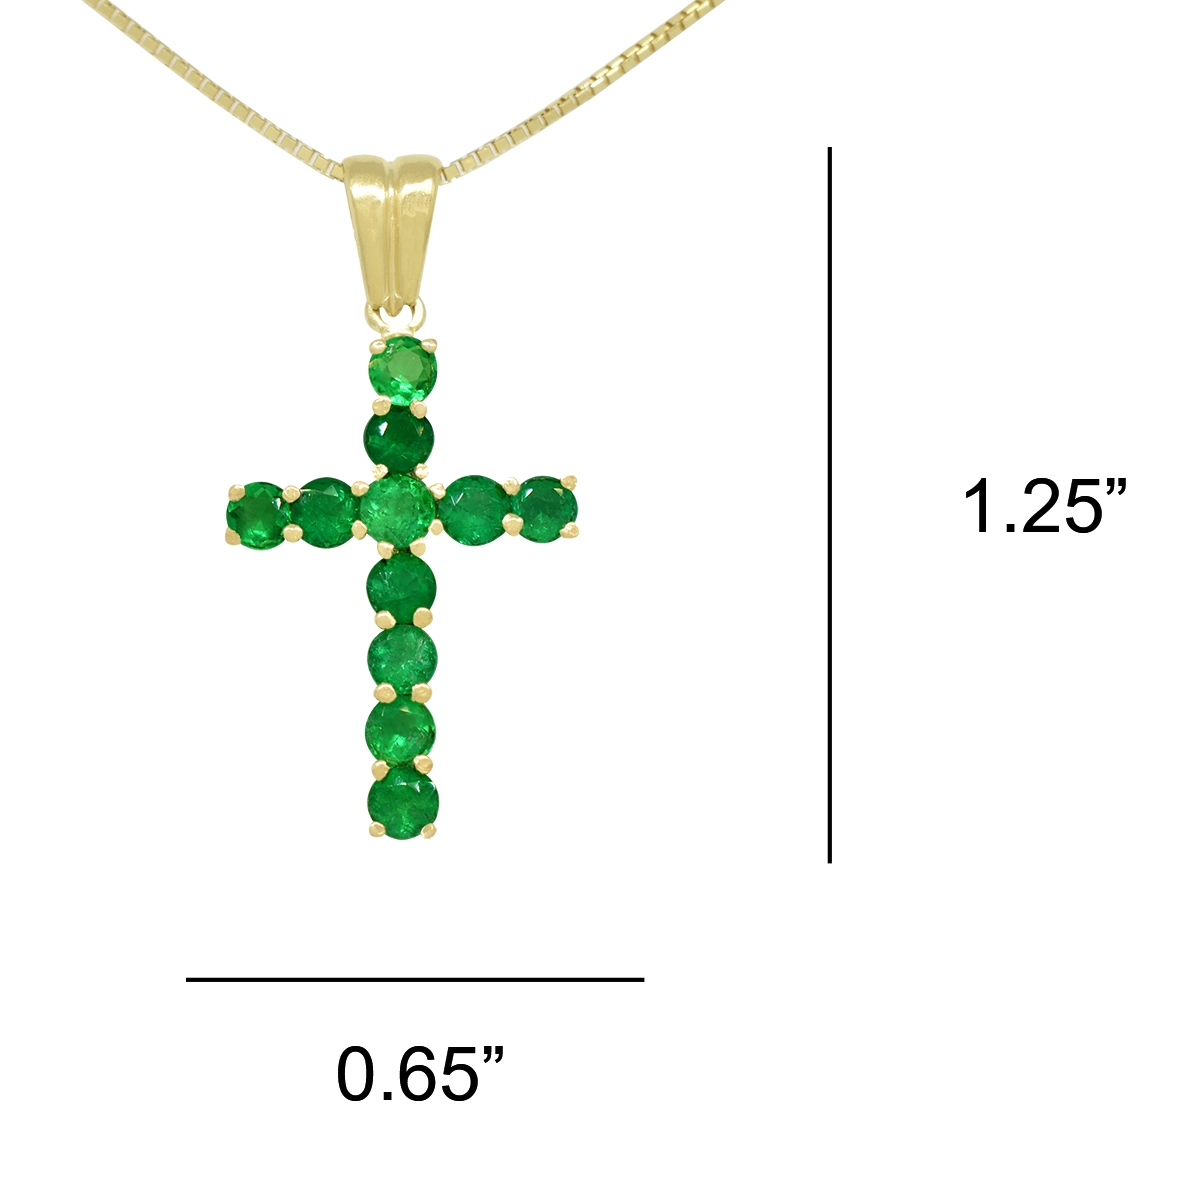 The dimensions of this cross pendant are 1.25 inches long from the top of the bail by 0.65 inches wide